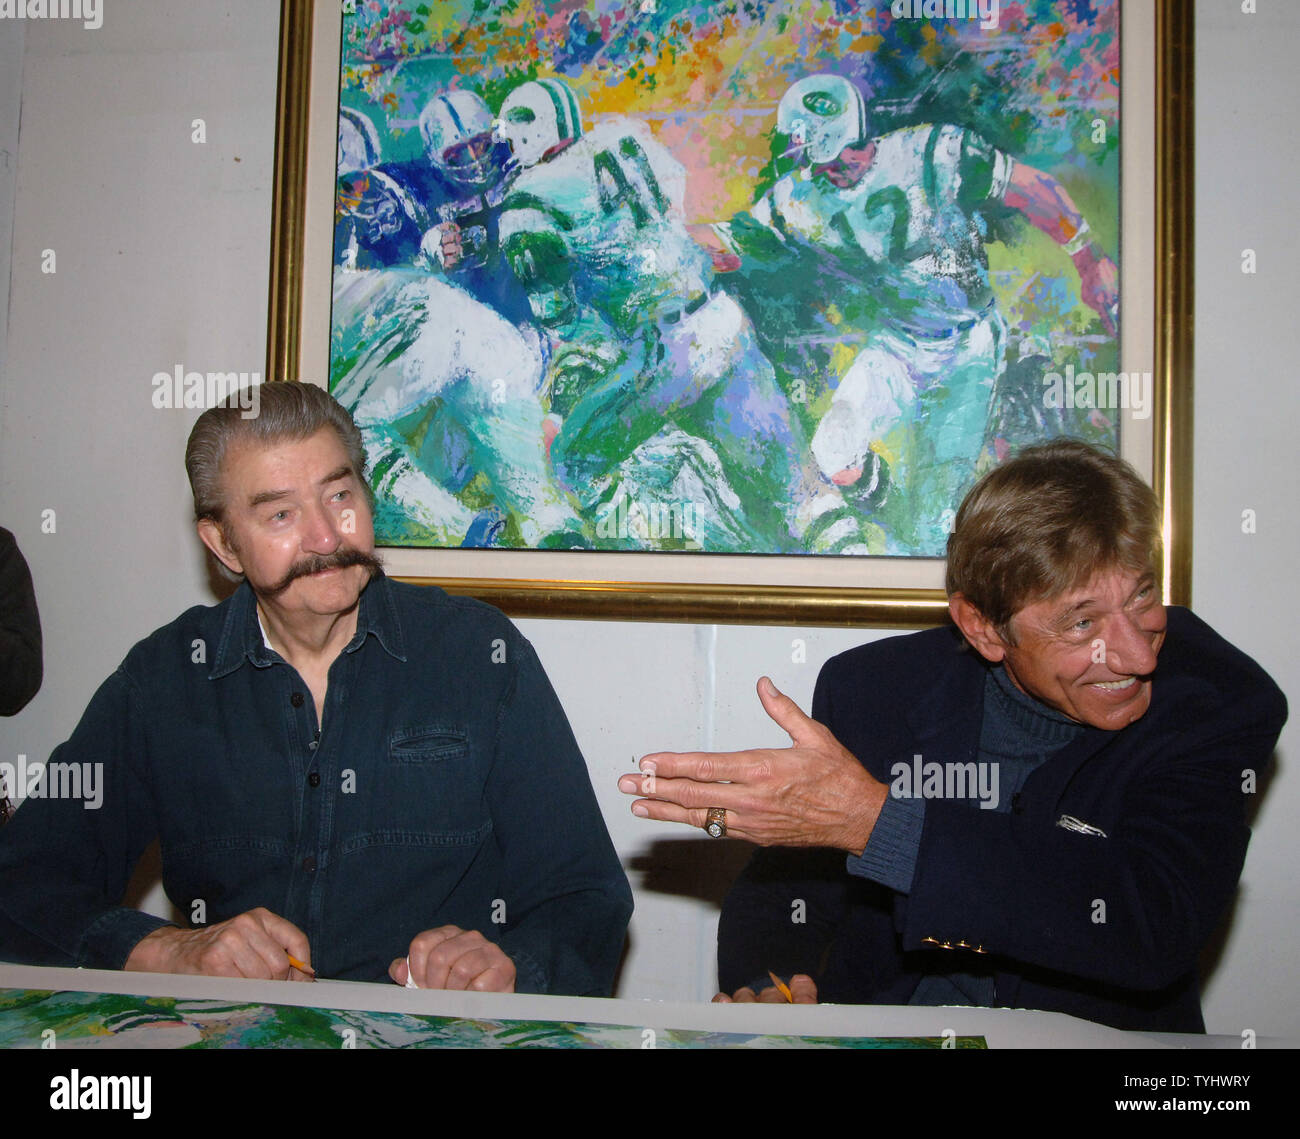 Artist Leroy Neiman and New York Jets former QB Joe Namath (right)  check and sign each of the 350 limited edition  serigraphs on January 18, 2007 depicting Namath's 1969 SuperBowl III win. The New York Jets beat the Baltimore Colts 16-7.  The serigraph will retail for $4200.     (UPI Photo/Ezio Petersen) Stock Photo